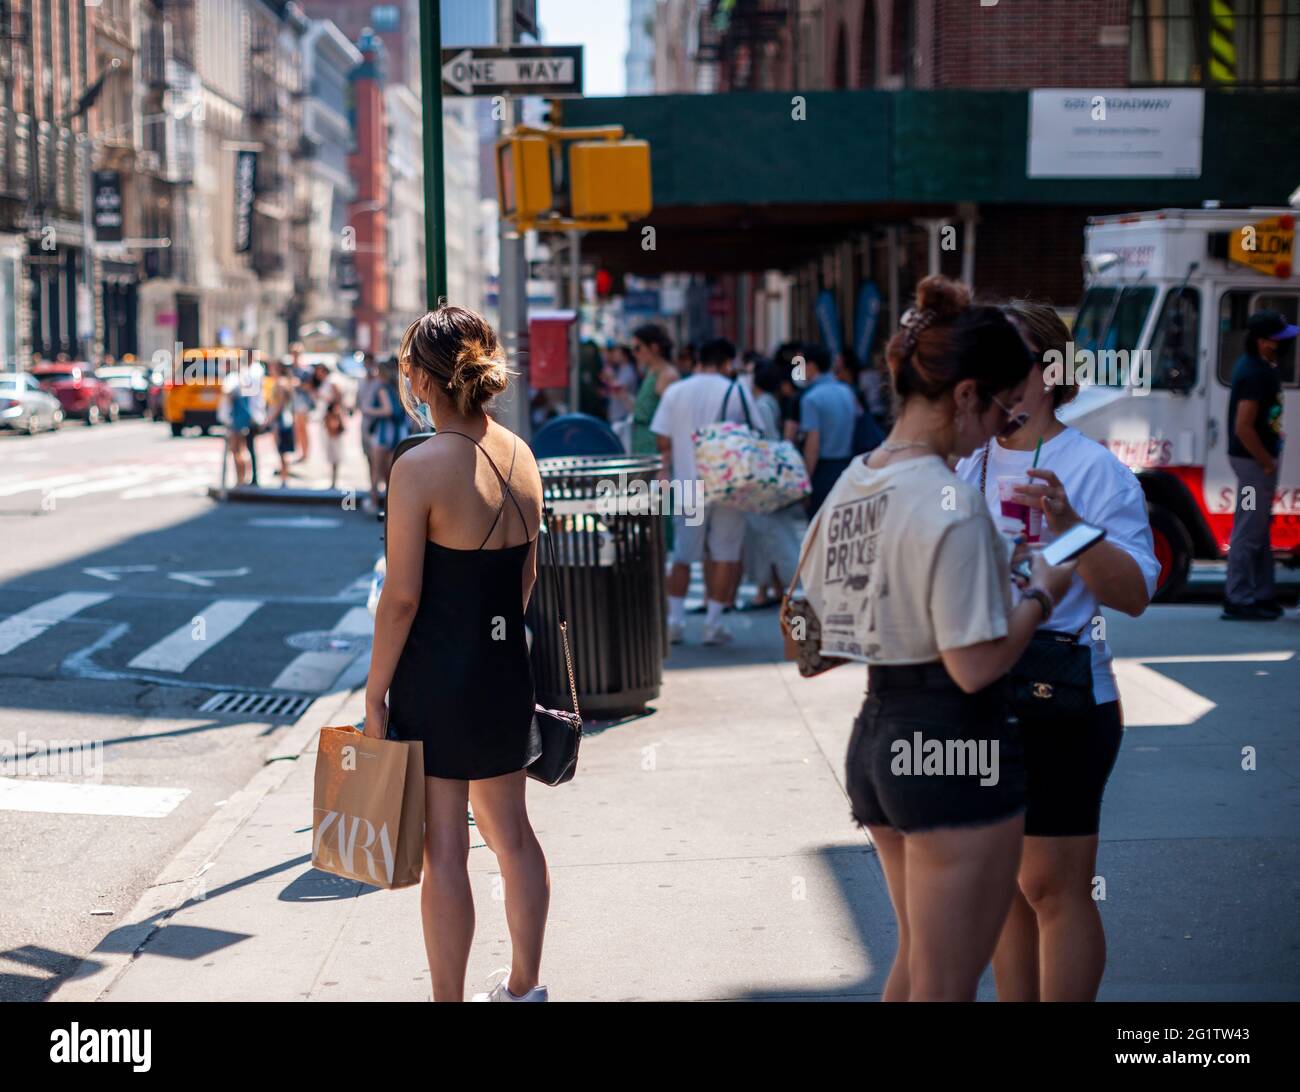 New York, USA. 06th June, 2021. Shoppers in the Soho neighborhood in New York on Sunday, June 6, 2021. New York has relaxed mask mandates allowing most outdoor activities to be mask free as well as many indoor settings, with caveats. (ÂPhoto by Richard B. Levine) Credit: Sipa USA/Alamy Live News Stock Photo